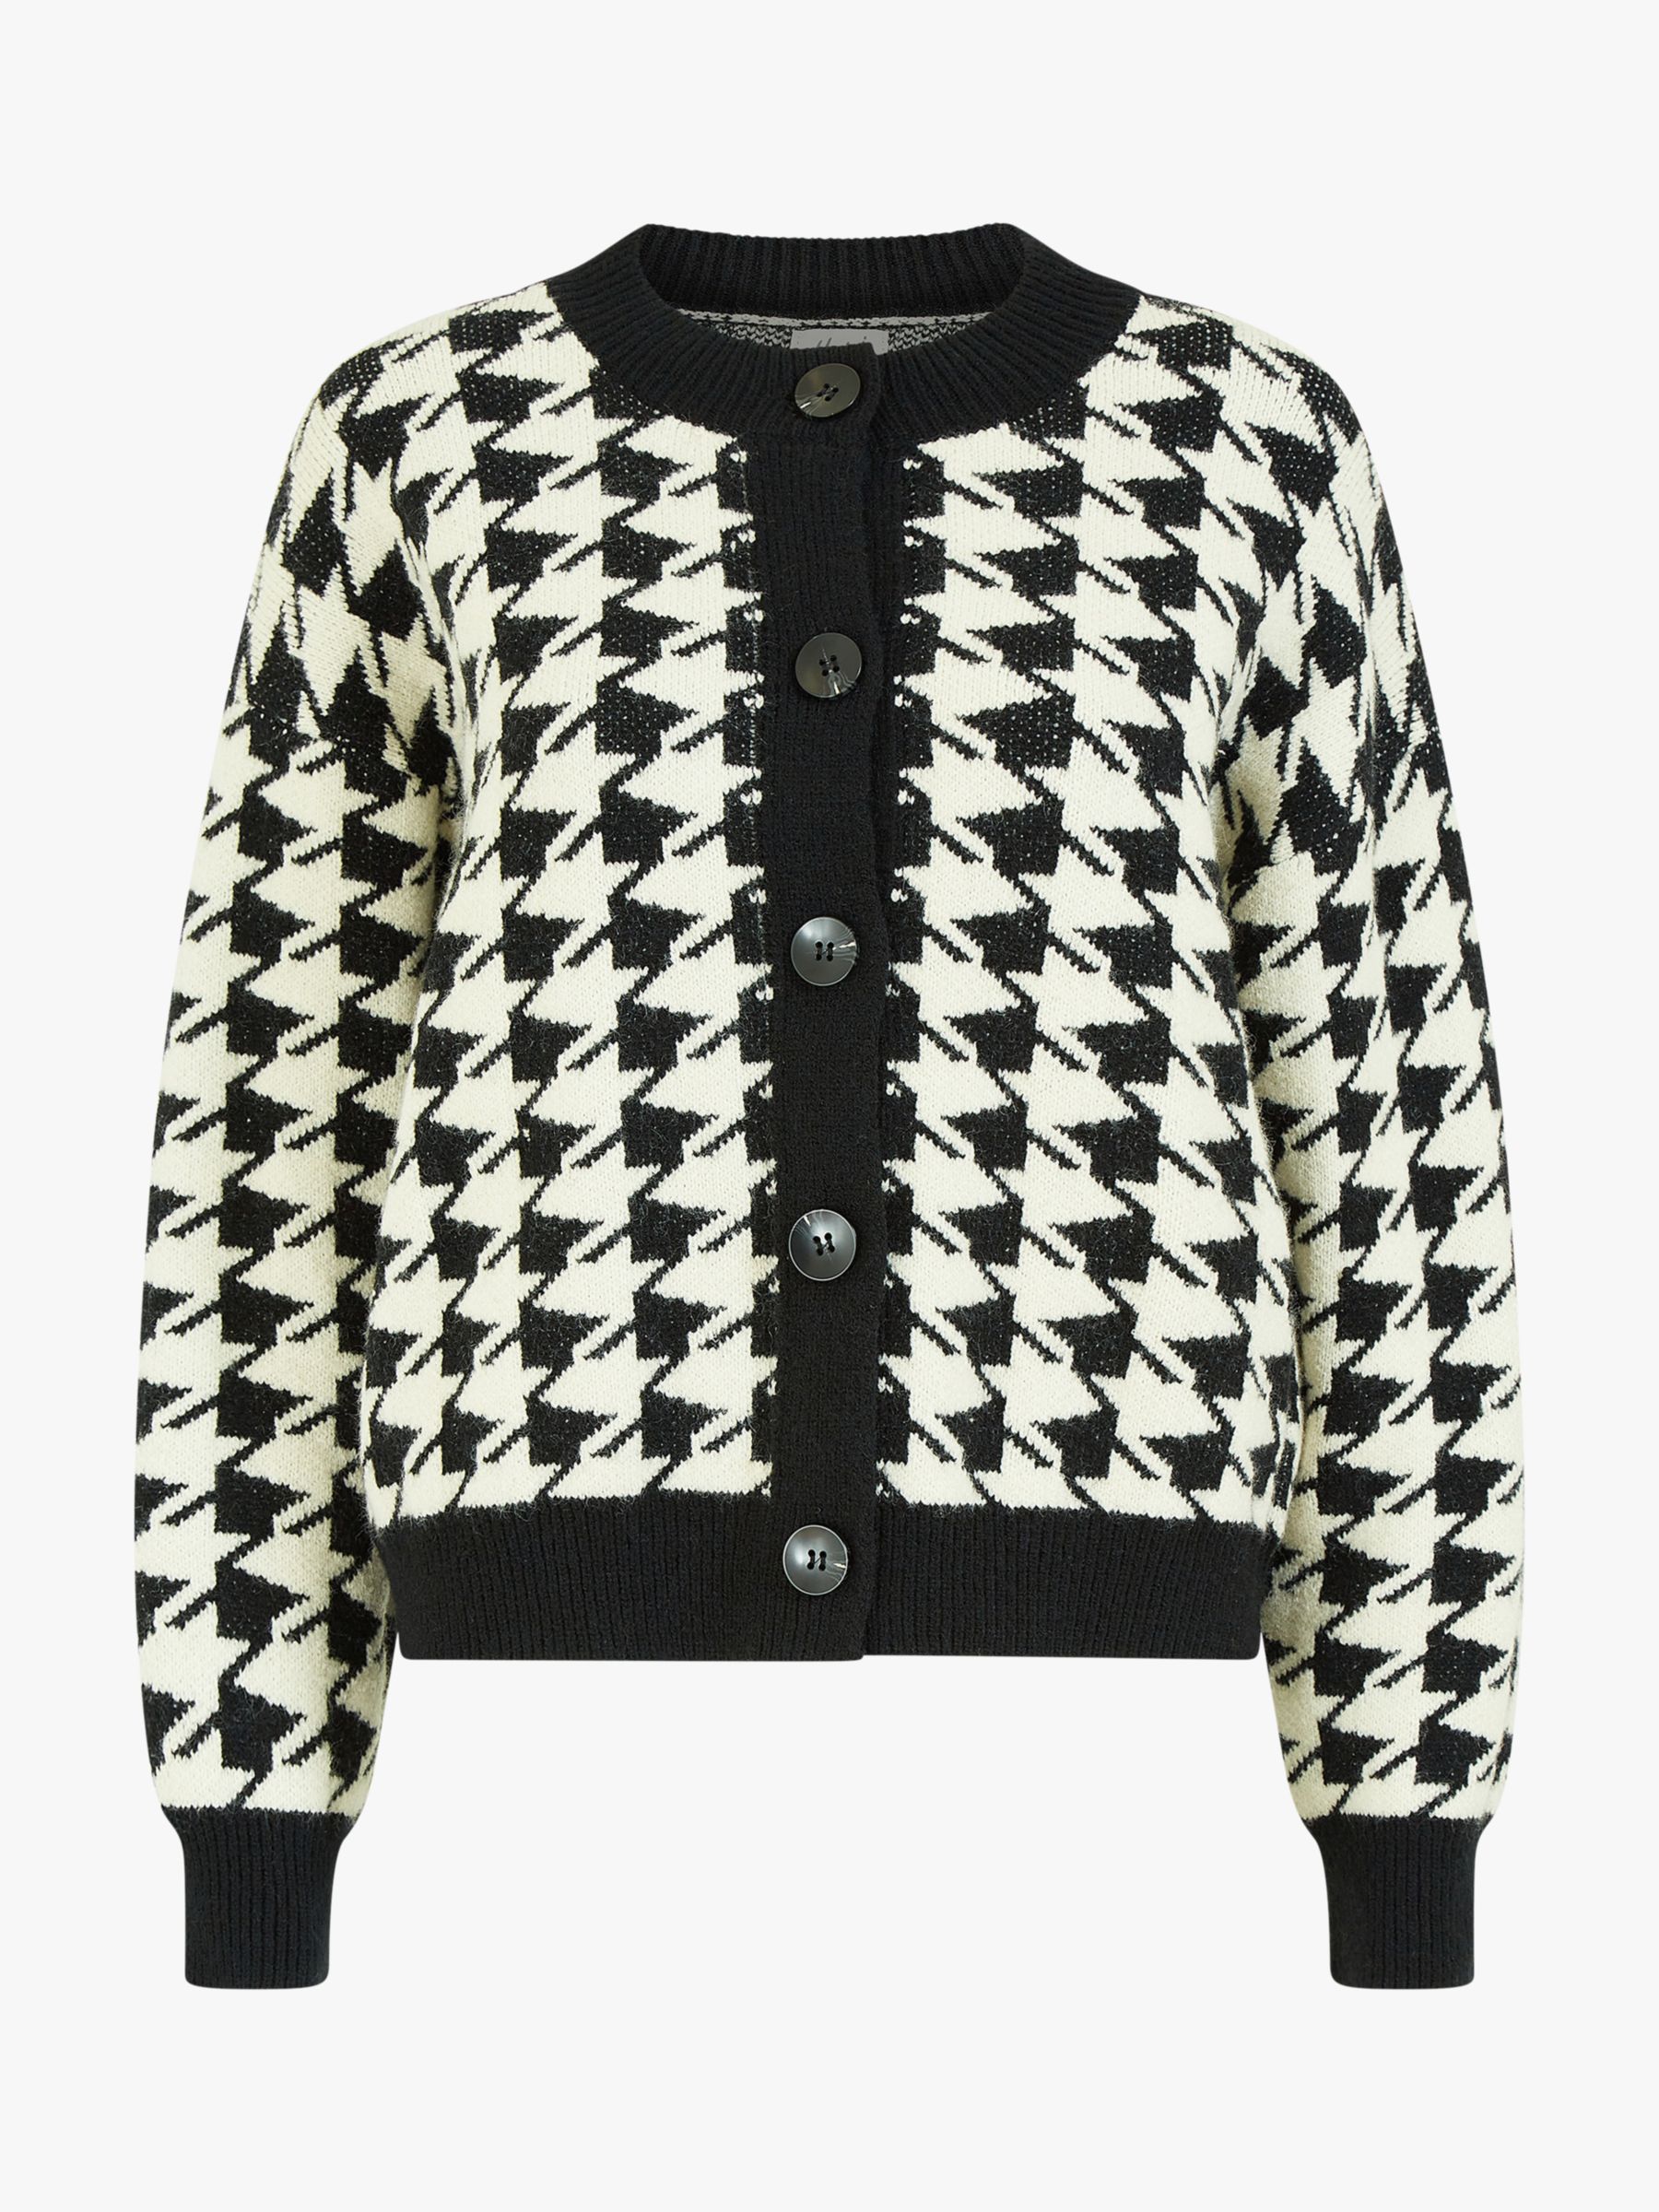 Buy Yumi Houndstooth Cardigan Online at johnlewis.com